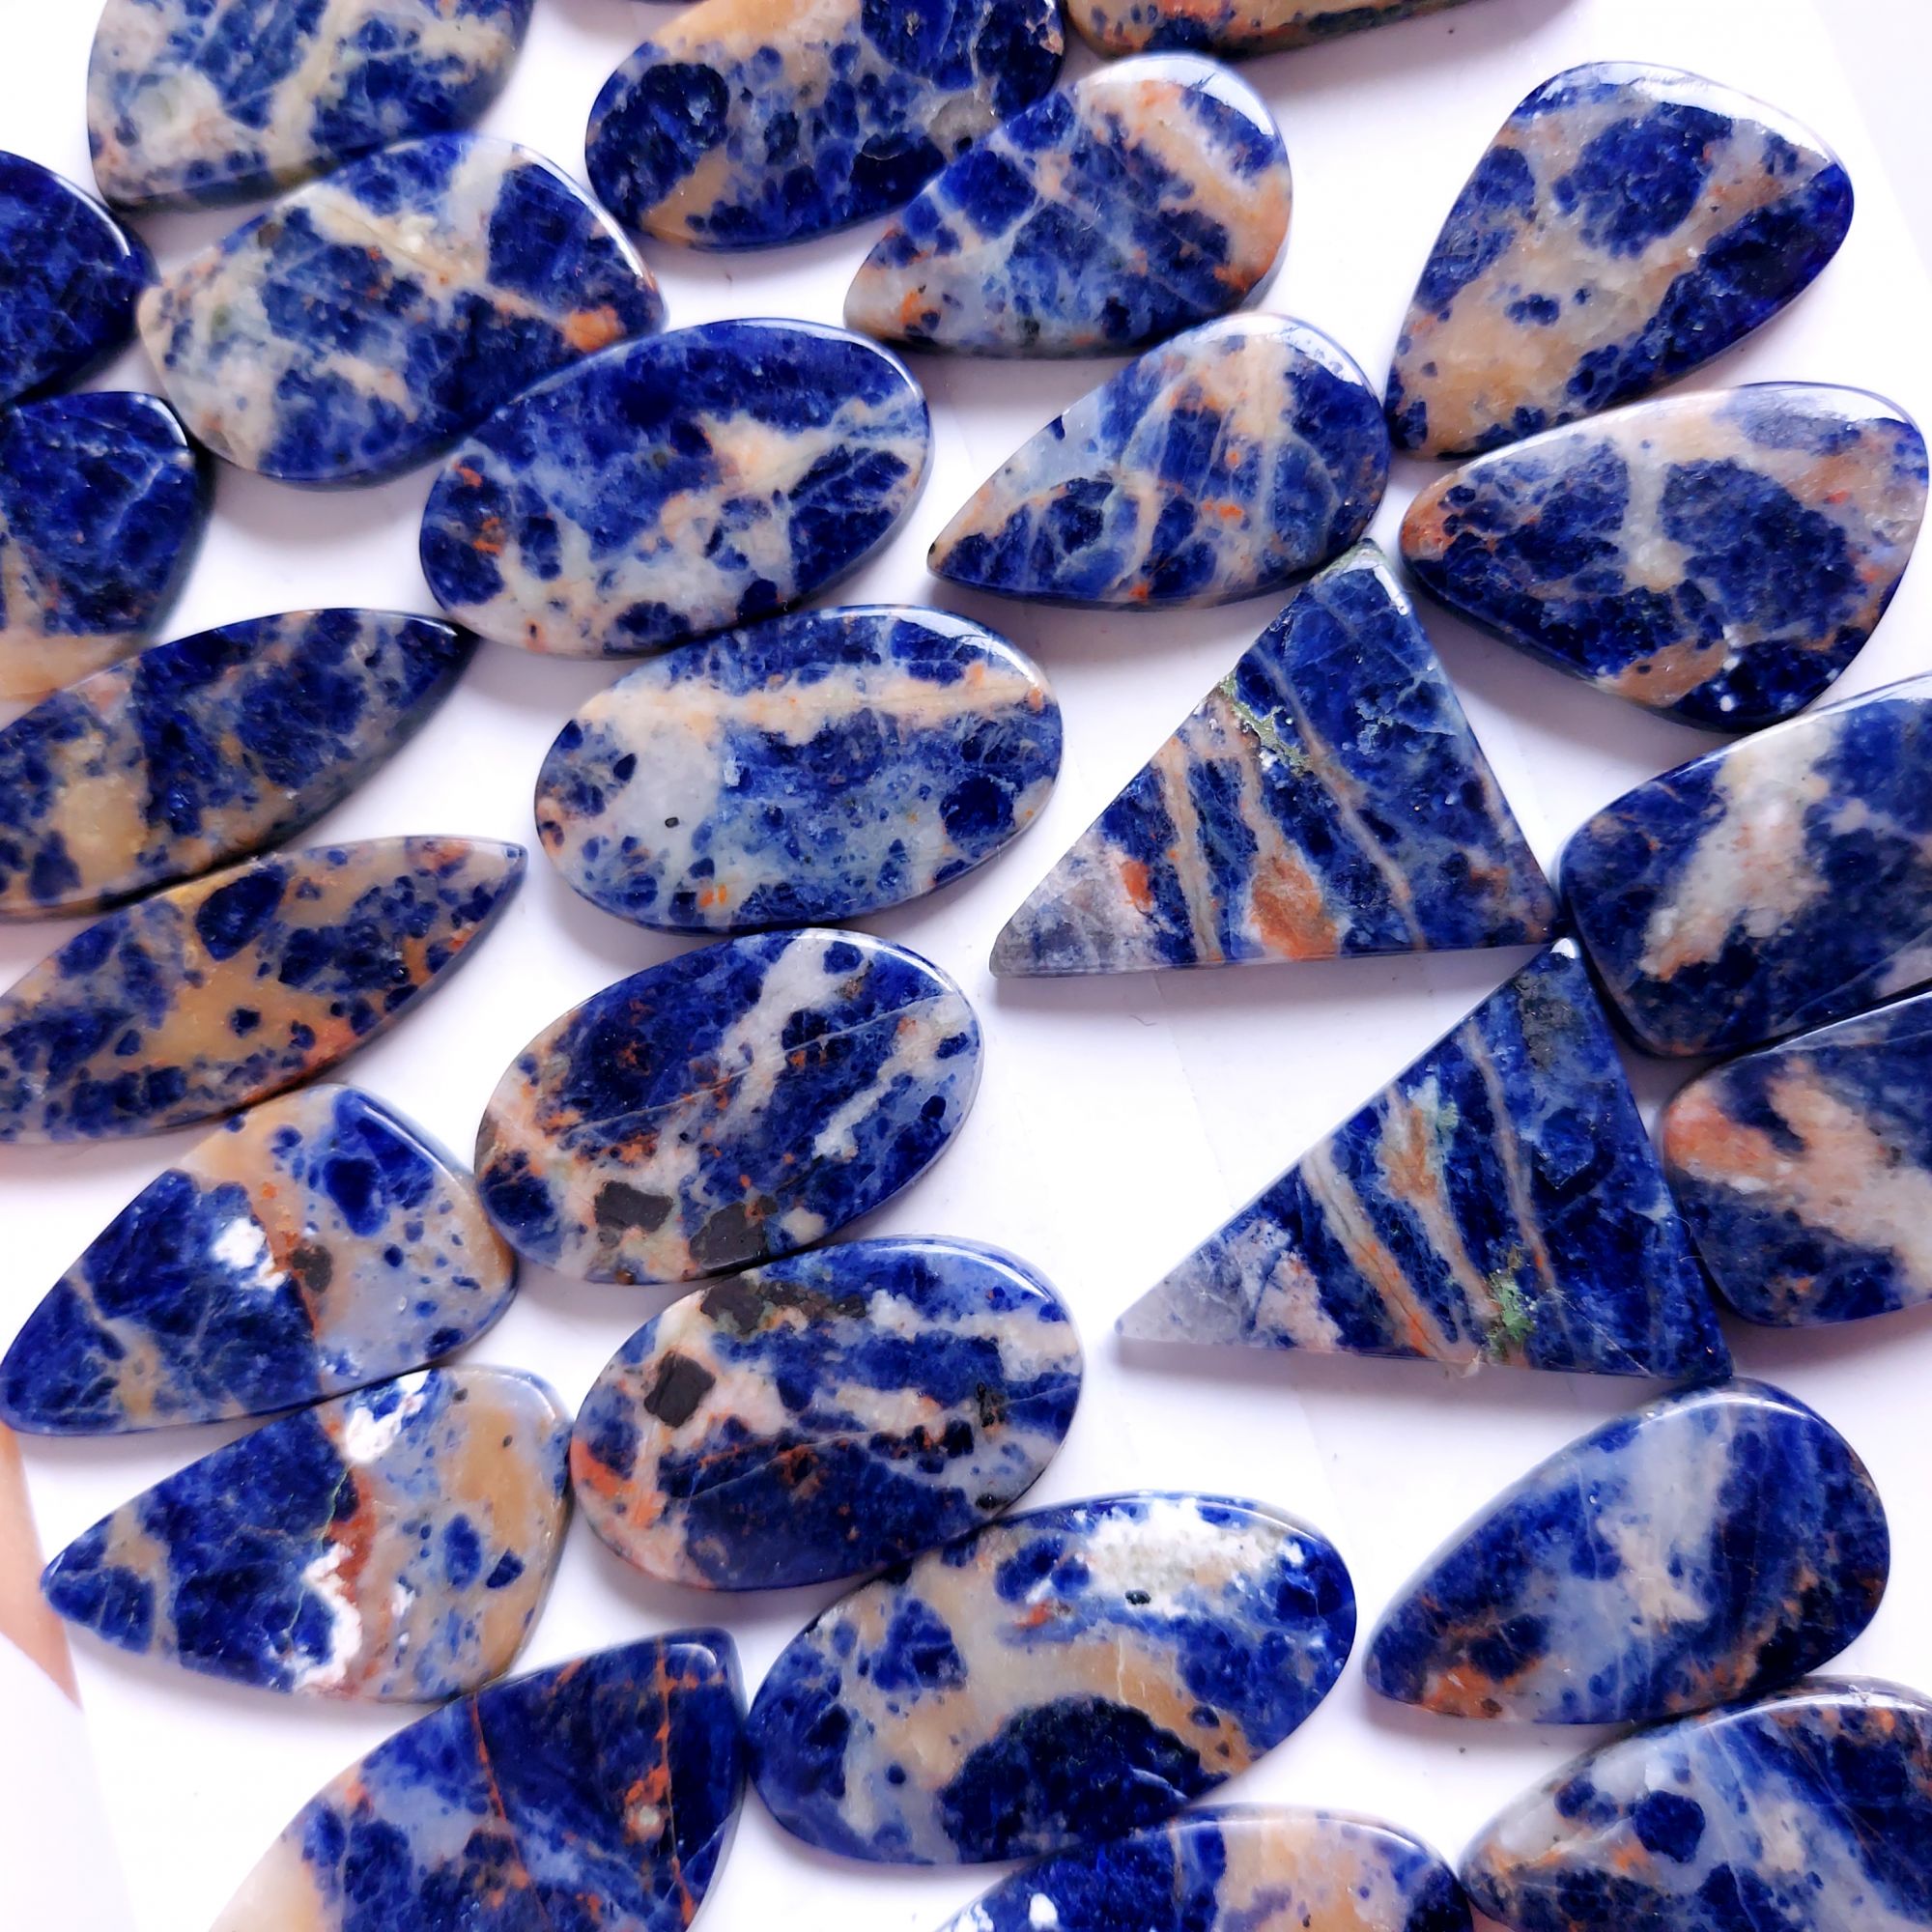 15 Pair 335Cts Natural Sodalite Cabochon Pair Loose Gemstone For Jewelry Wholesale Lot Size 35x12 24x13mm